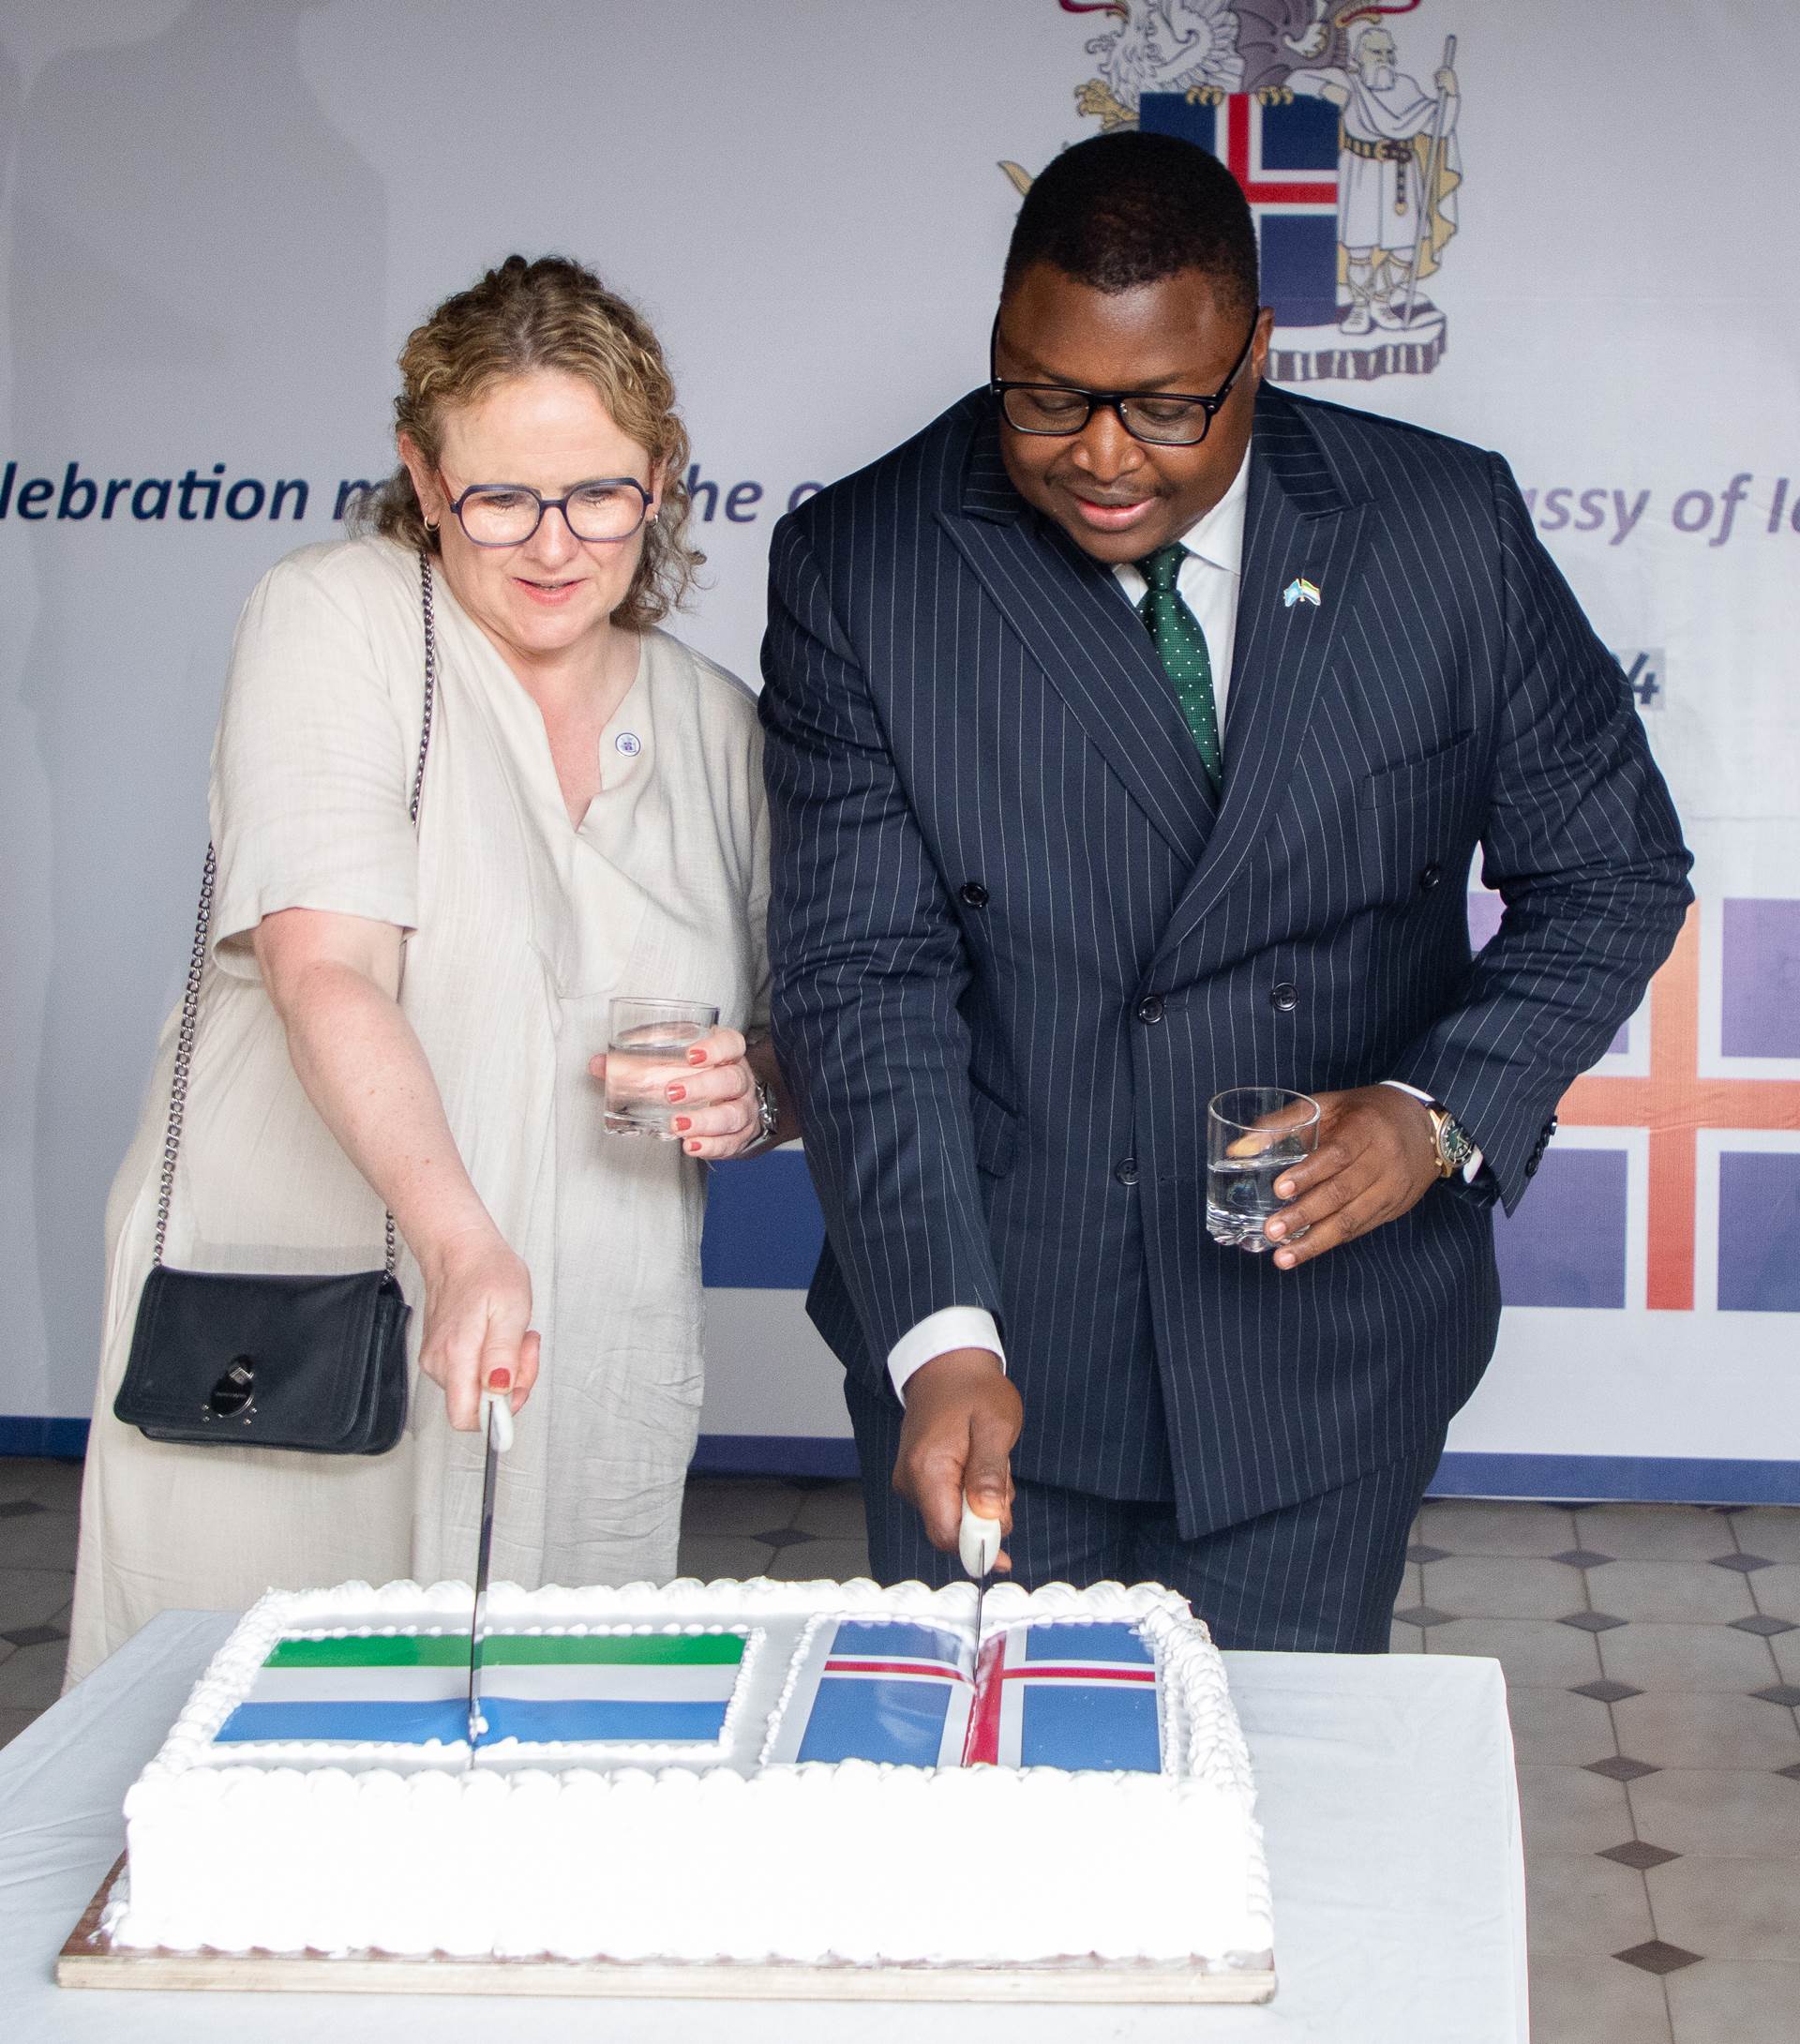 Elín R. Sigurðardóttir, Director General at the Directorate for International Development Cooperation, and Timothy M. Kabba, Minister of Foreign Affairs and International Cooperation of Sierra Leone, marked the occasion by cutting a cake with Iceland's and Sierra Leone's national flags. - mynd